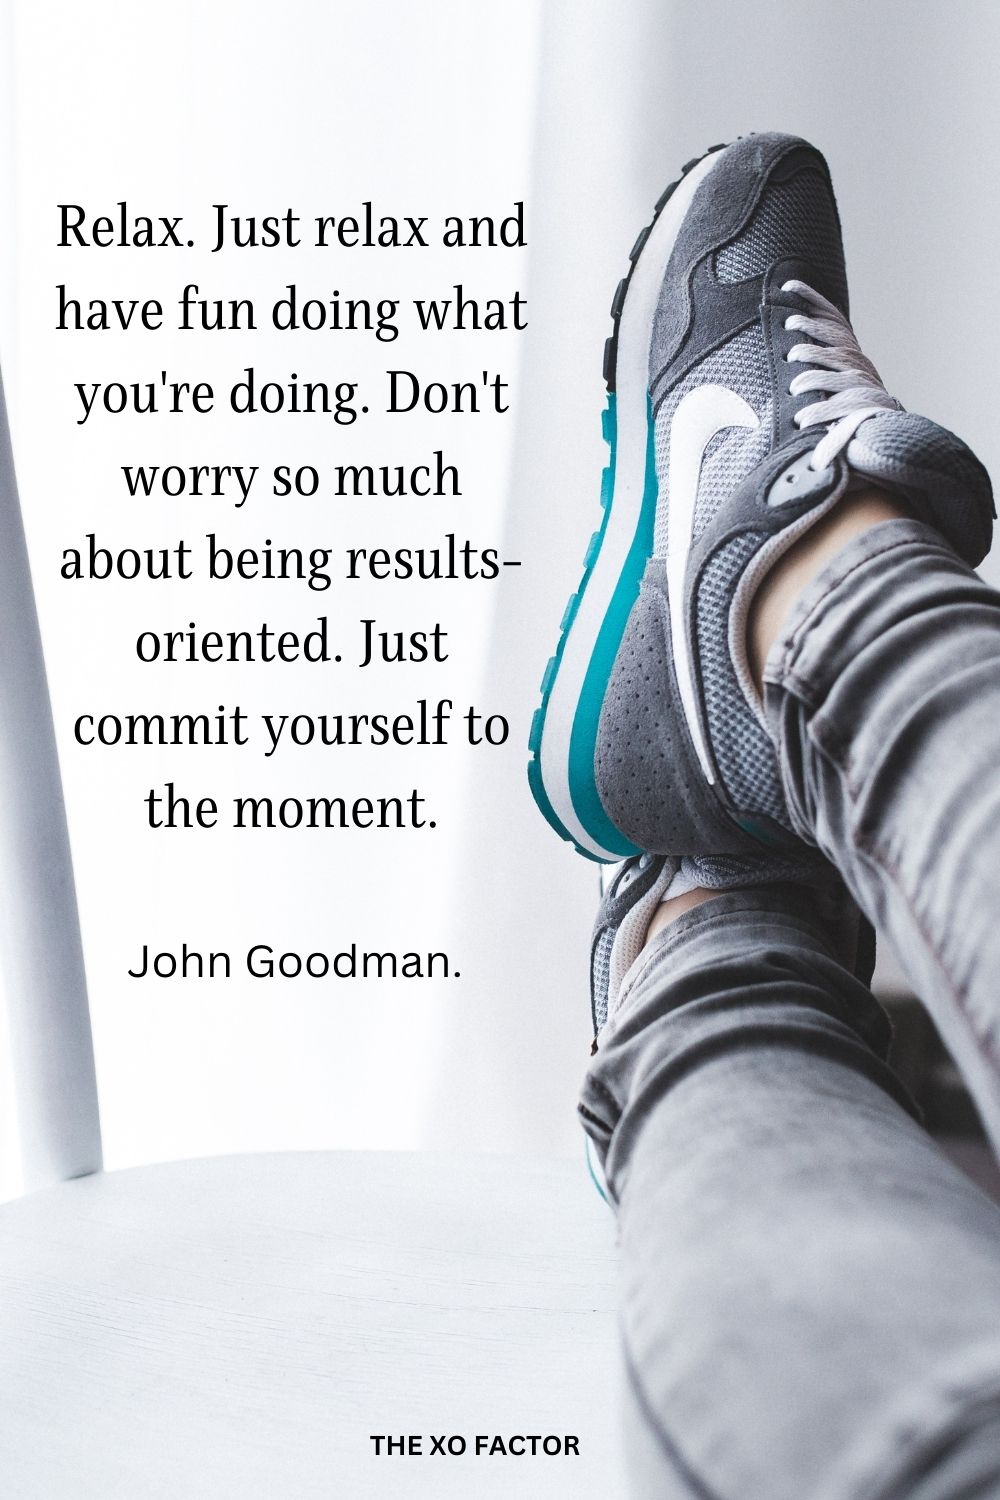 Relax. Just relax and have fun doing what you're doing. Don't worry so much about being results-oriented. Just commit yourself to the moment.
John Goodman.